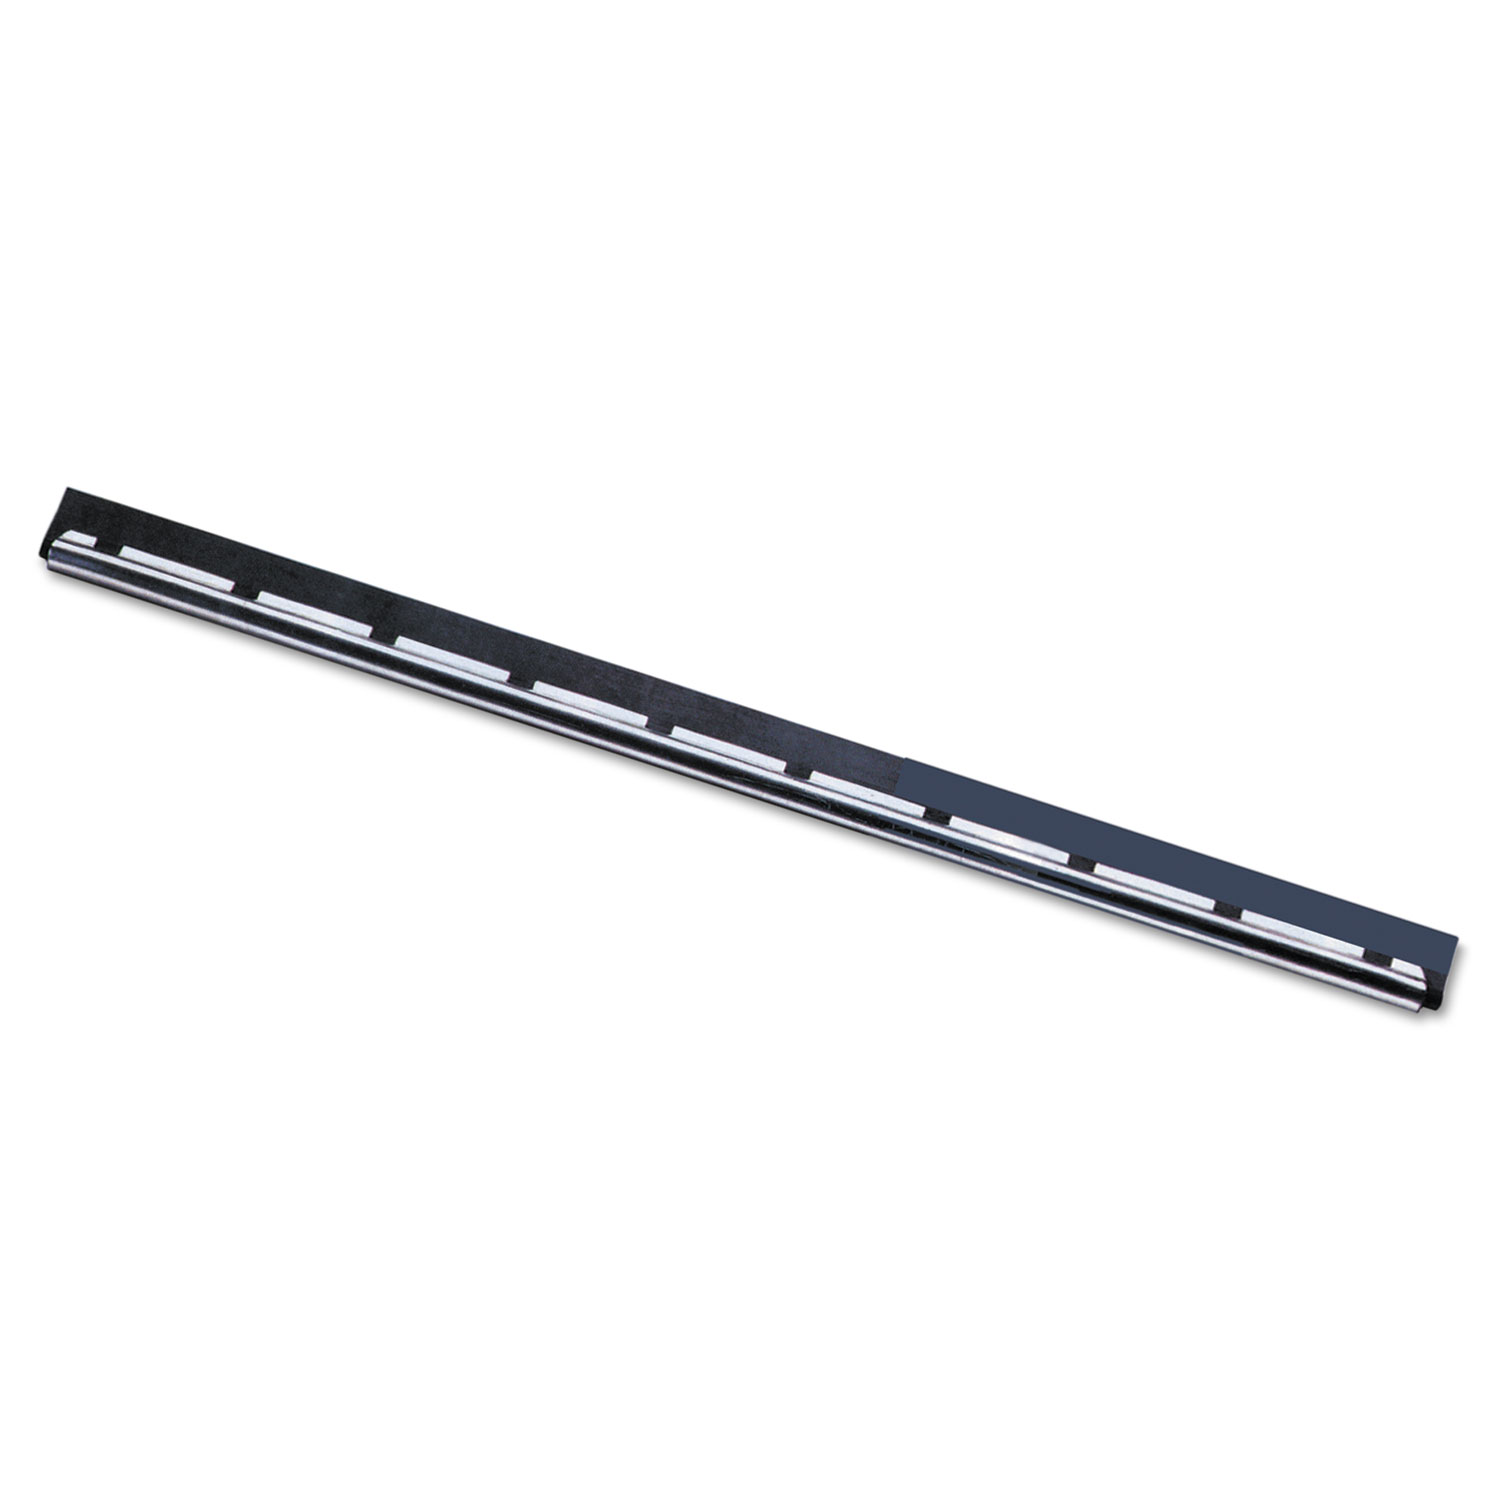  Unger NE300 Stainless Steel S Channel 12 with Soft Rubber (UNGNE30) 